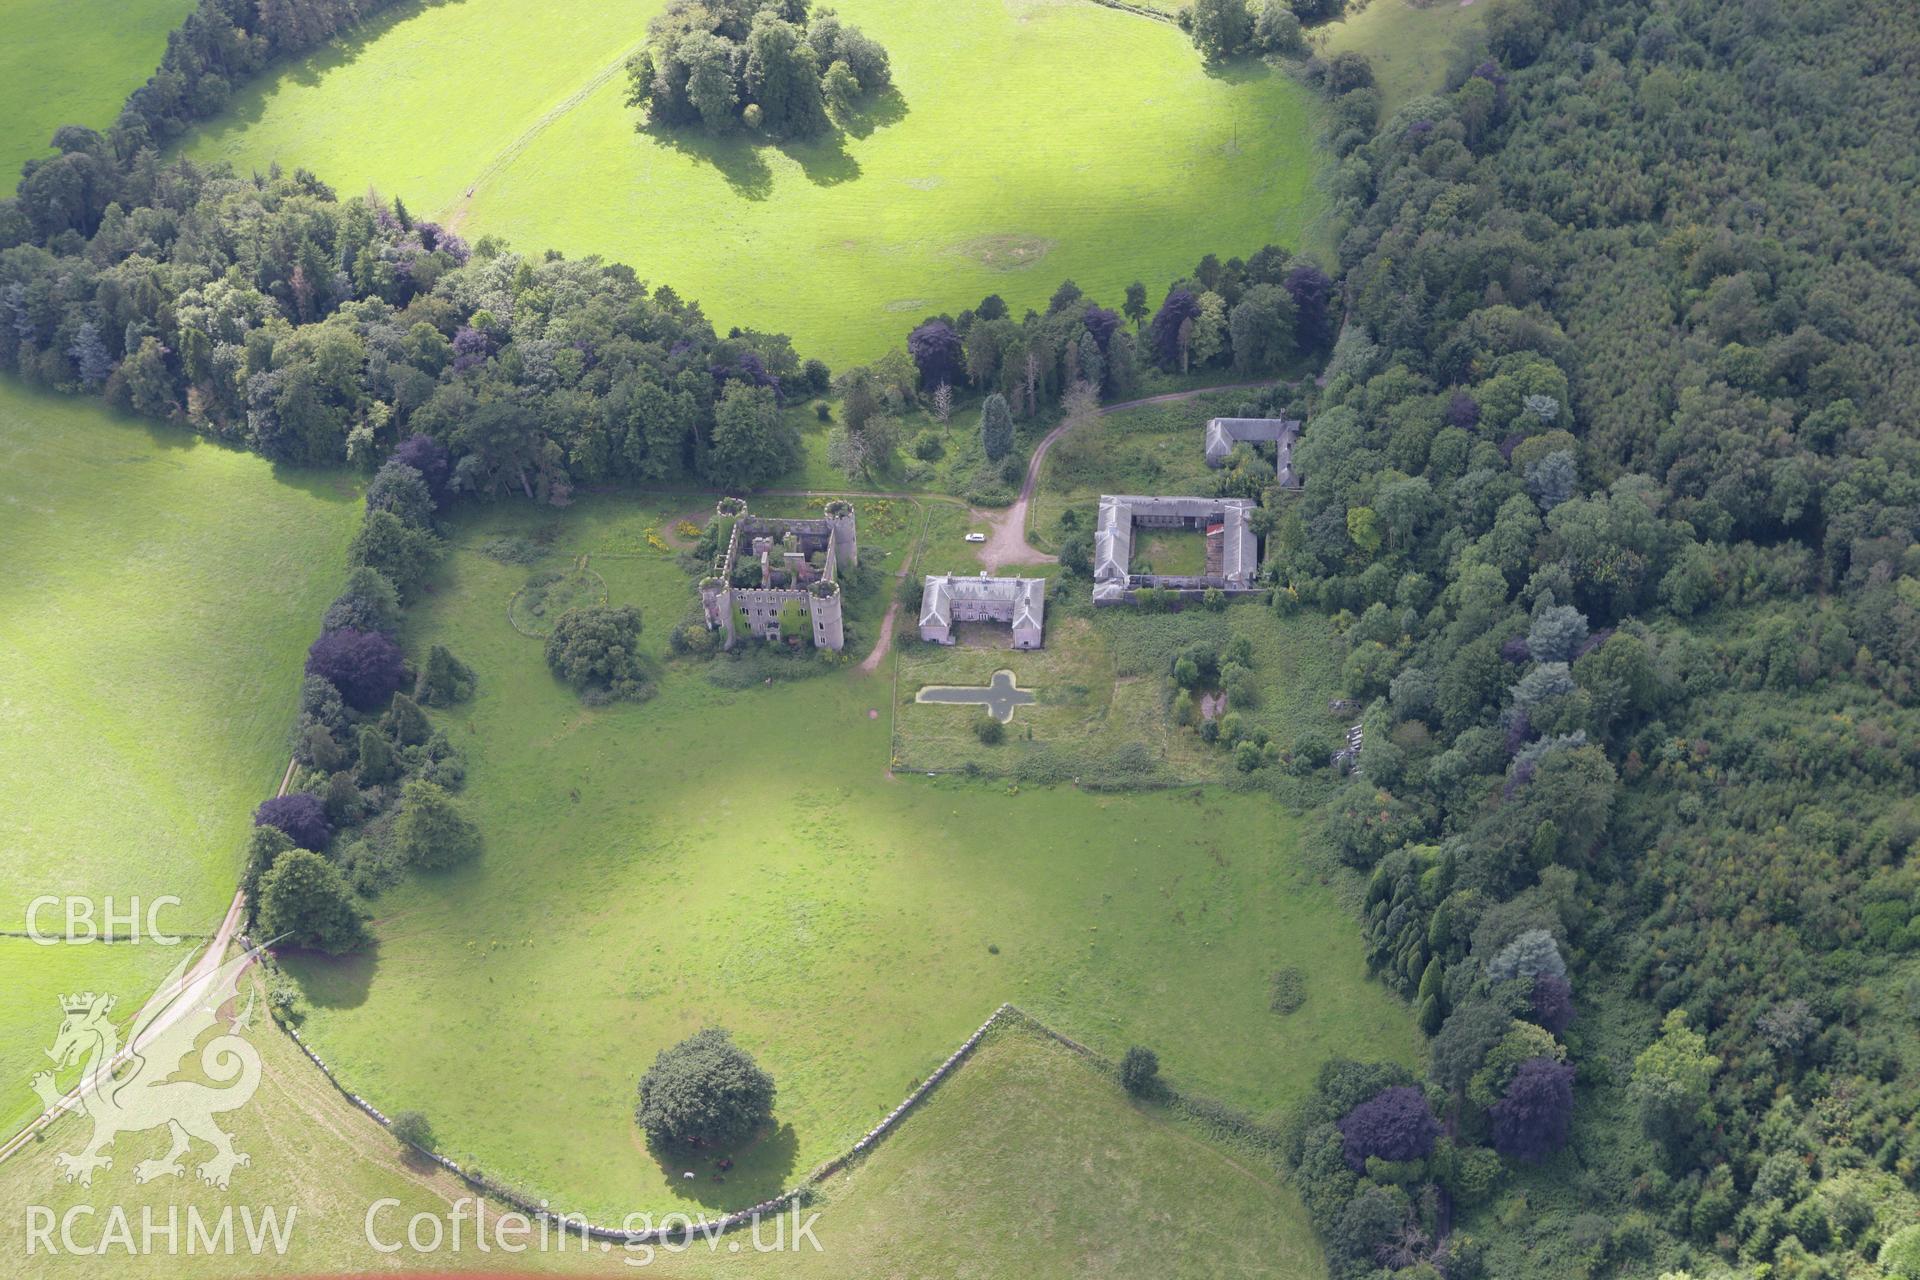 RCAHMW colour oblique aerial photograph of Ruperra Castle. Taken on 30 July 2007 by Toby Driver